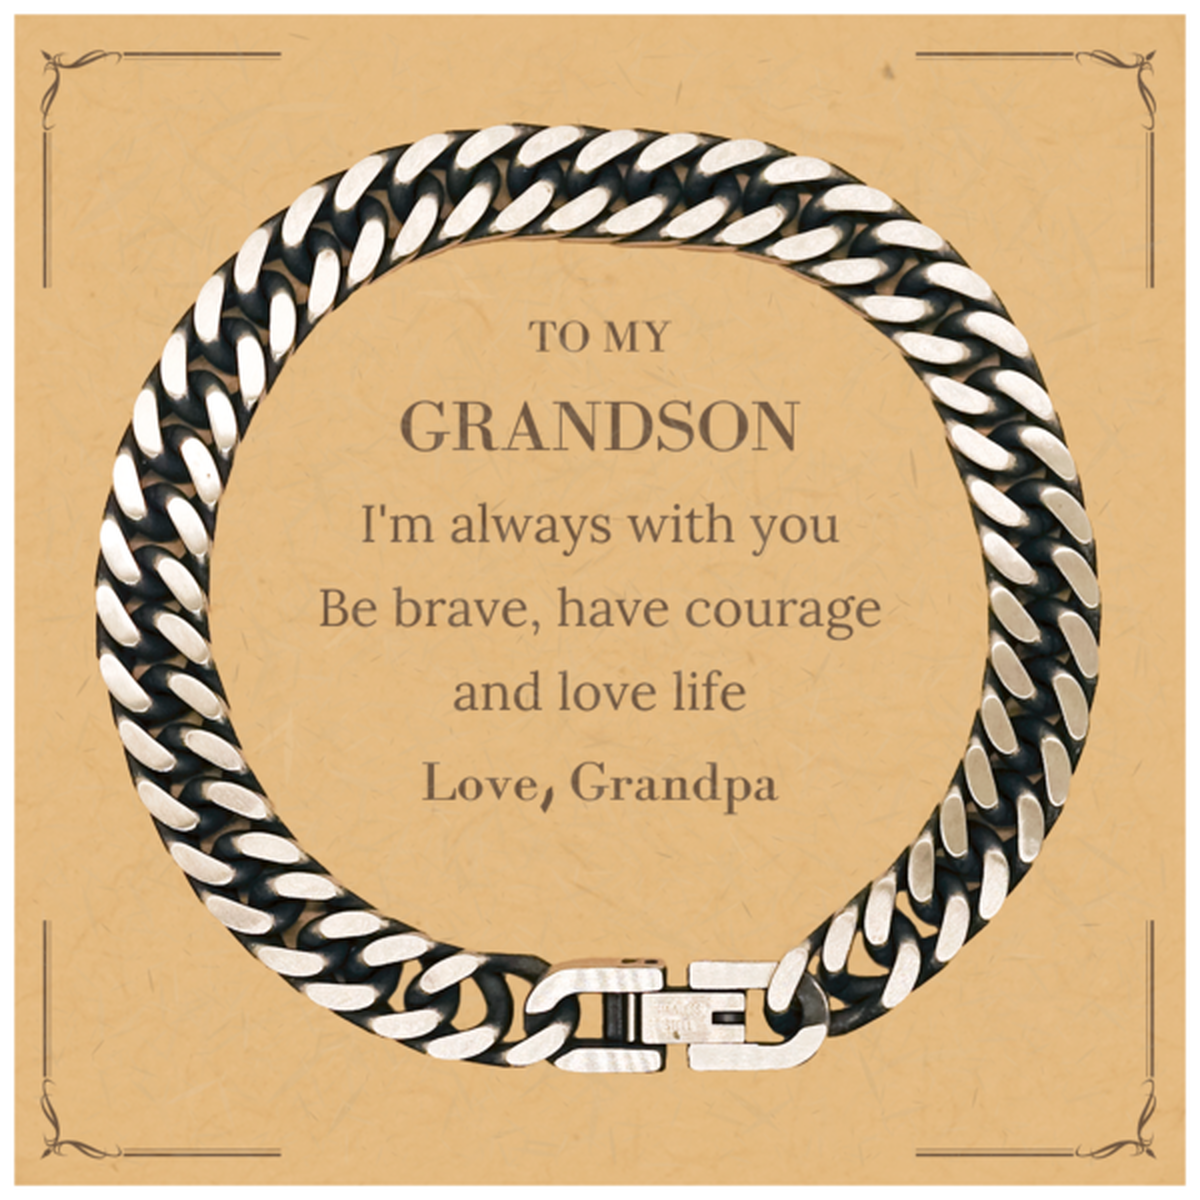 To My Grandson Gifts from Grandpa, Unique Cuban Link Chain Bracelet Inspirational Christmas Birthday Graduation Gifts for Grandson I'm always with you. Be brave, have courage and love life. Love, Grandpa